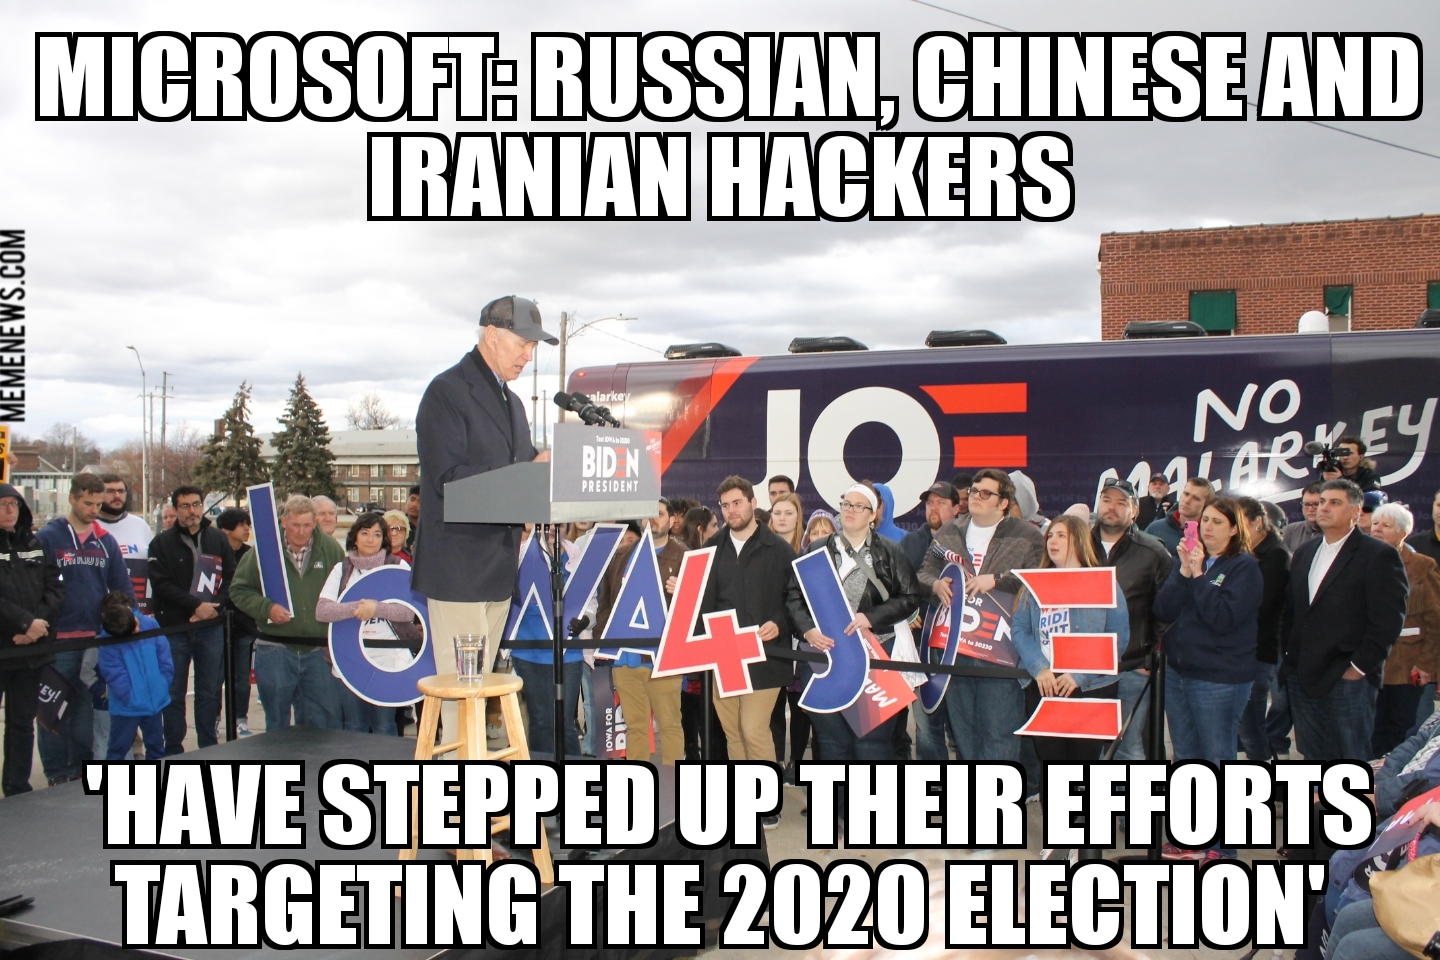 Hackers targeting 2020 election